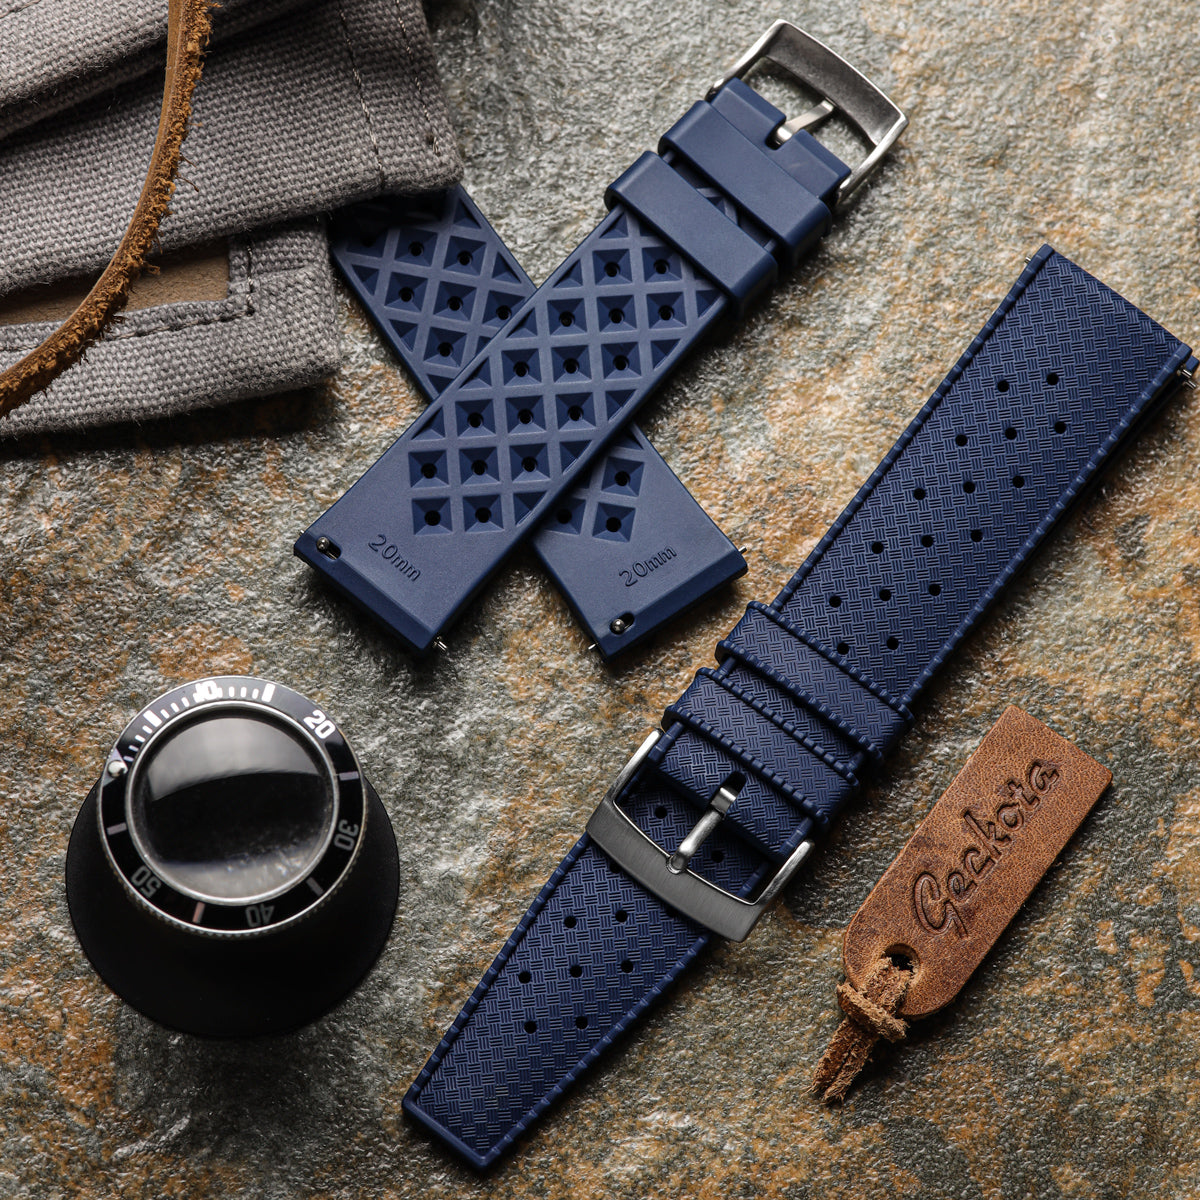 Classic Tropical Style FKM Rubber Watch Strap - Deep Sea Blue - additional image 1